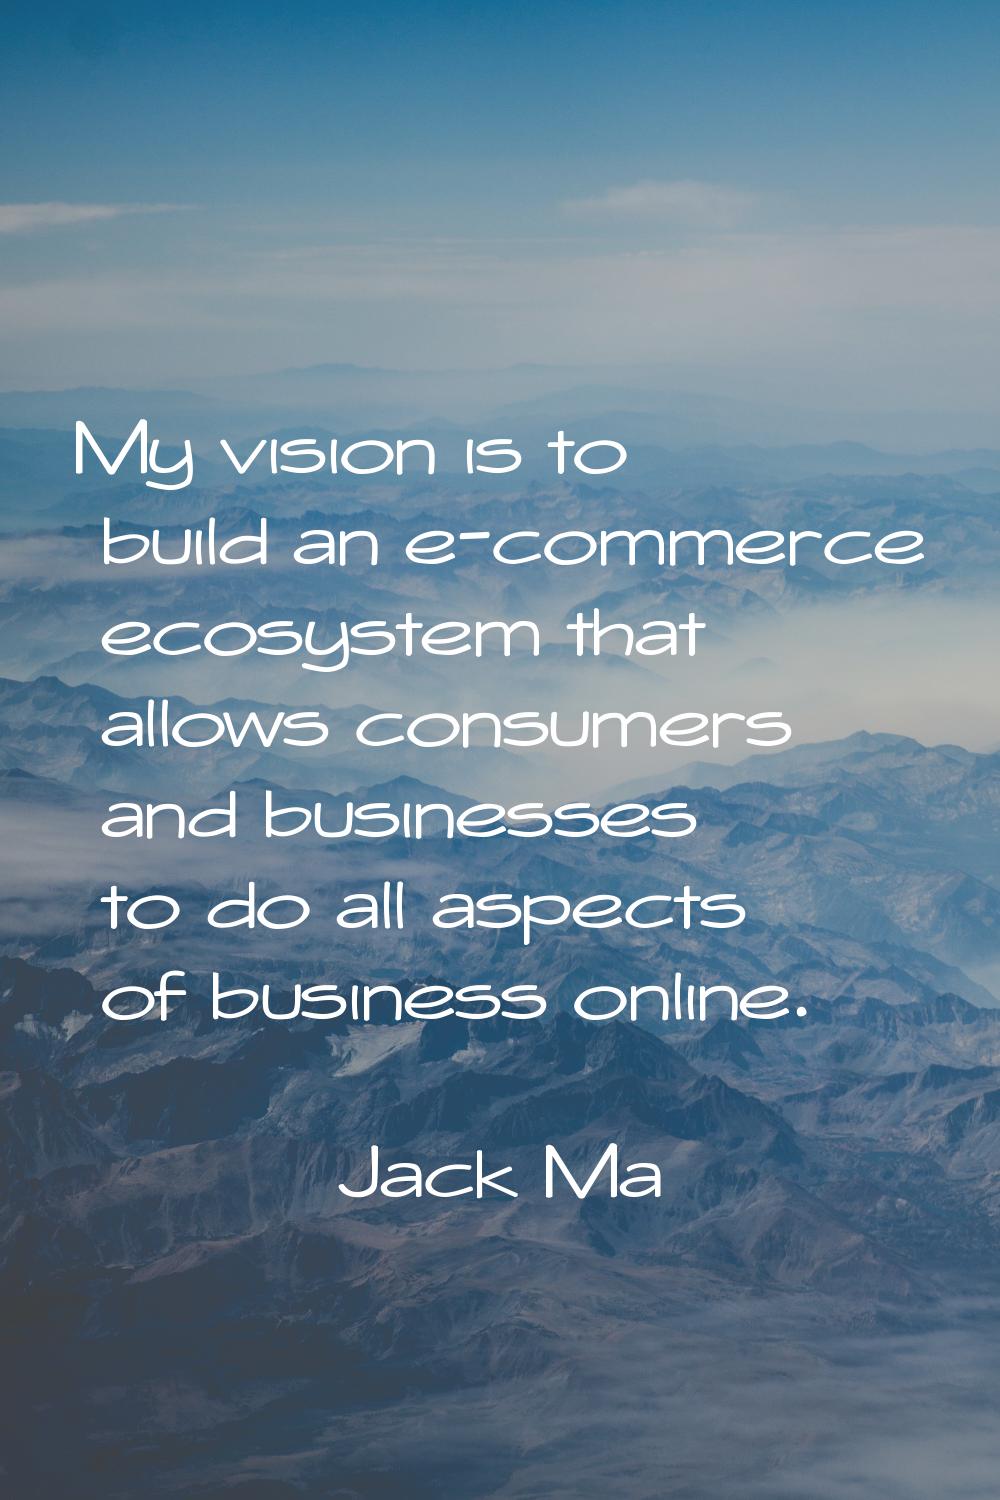 My vision is to build an e-commerce ecosystem that allows consumers and businesses to do all aspect